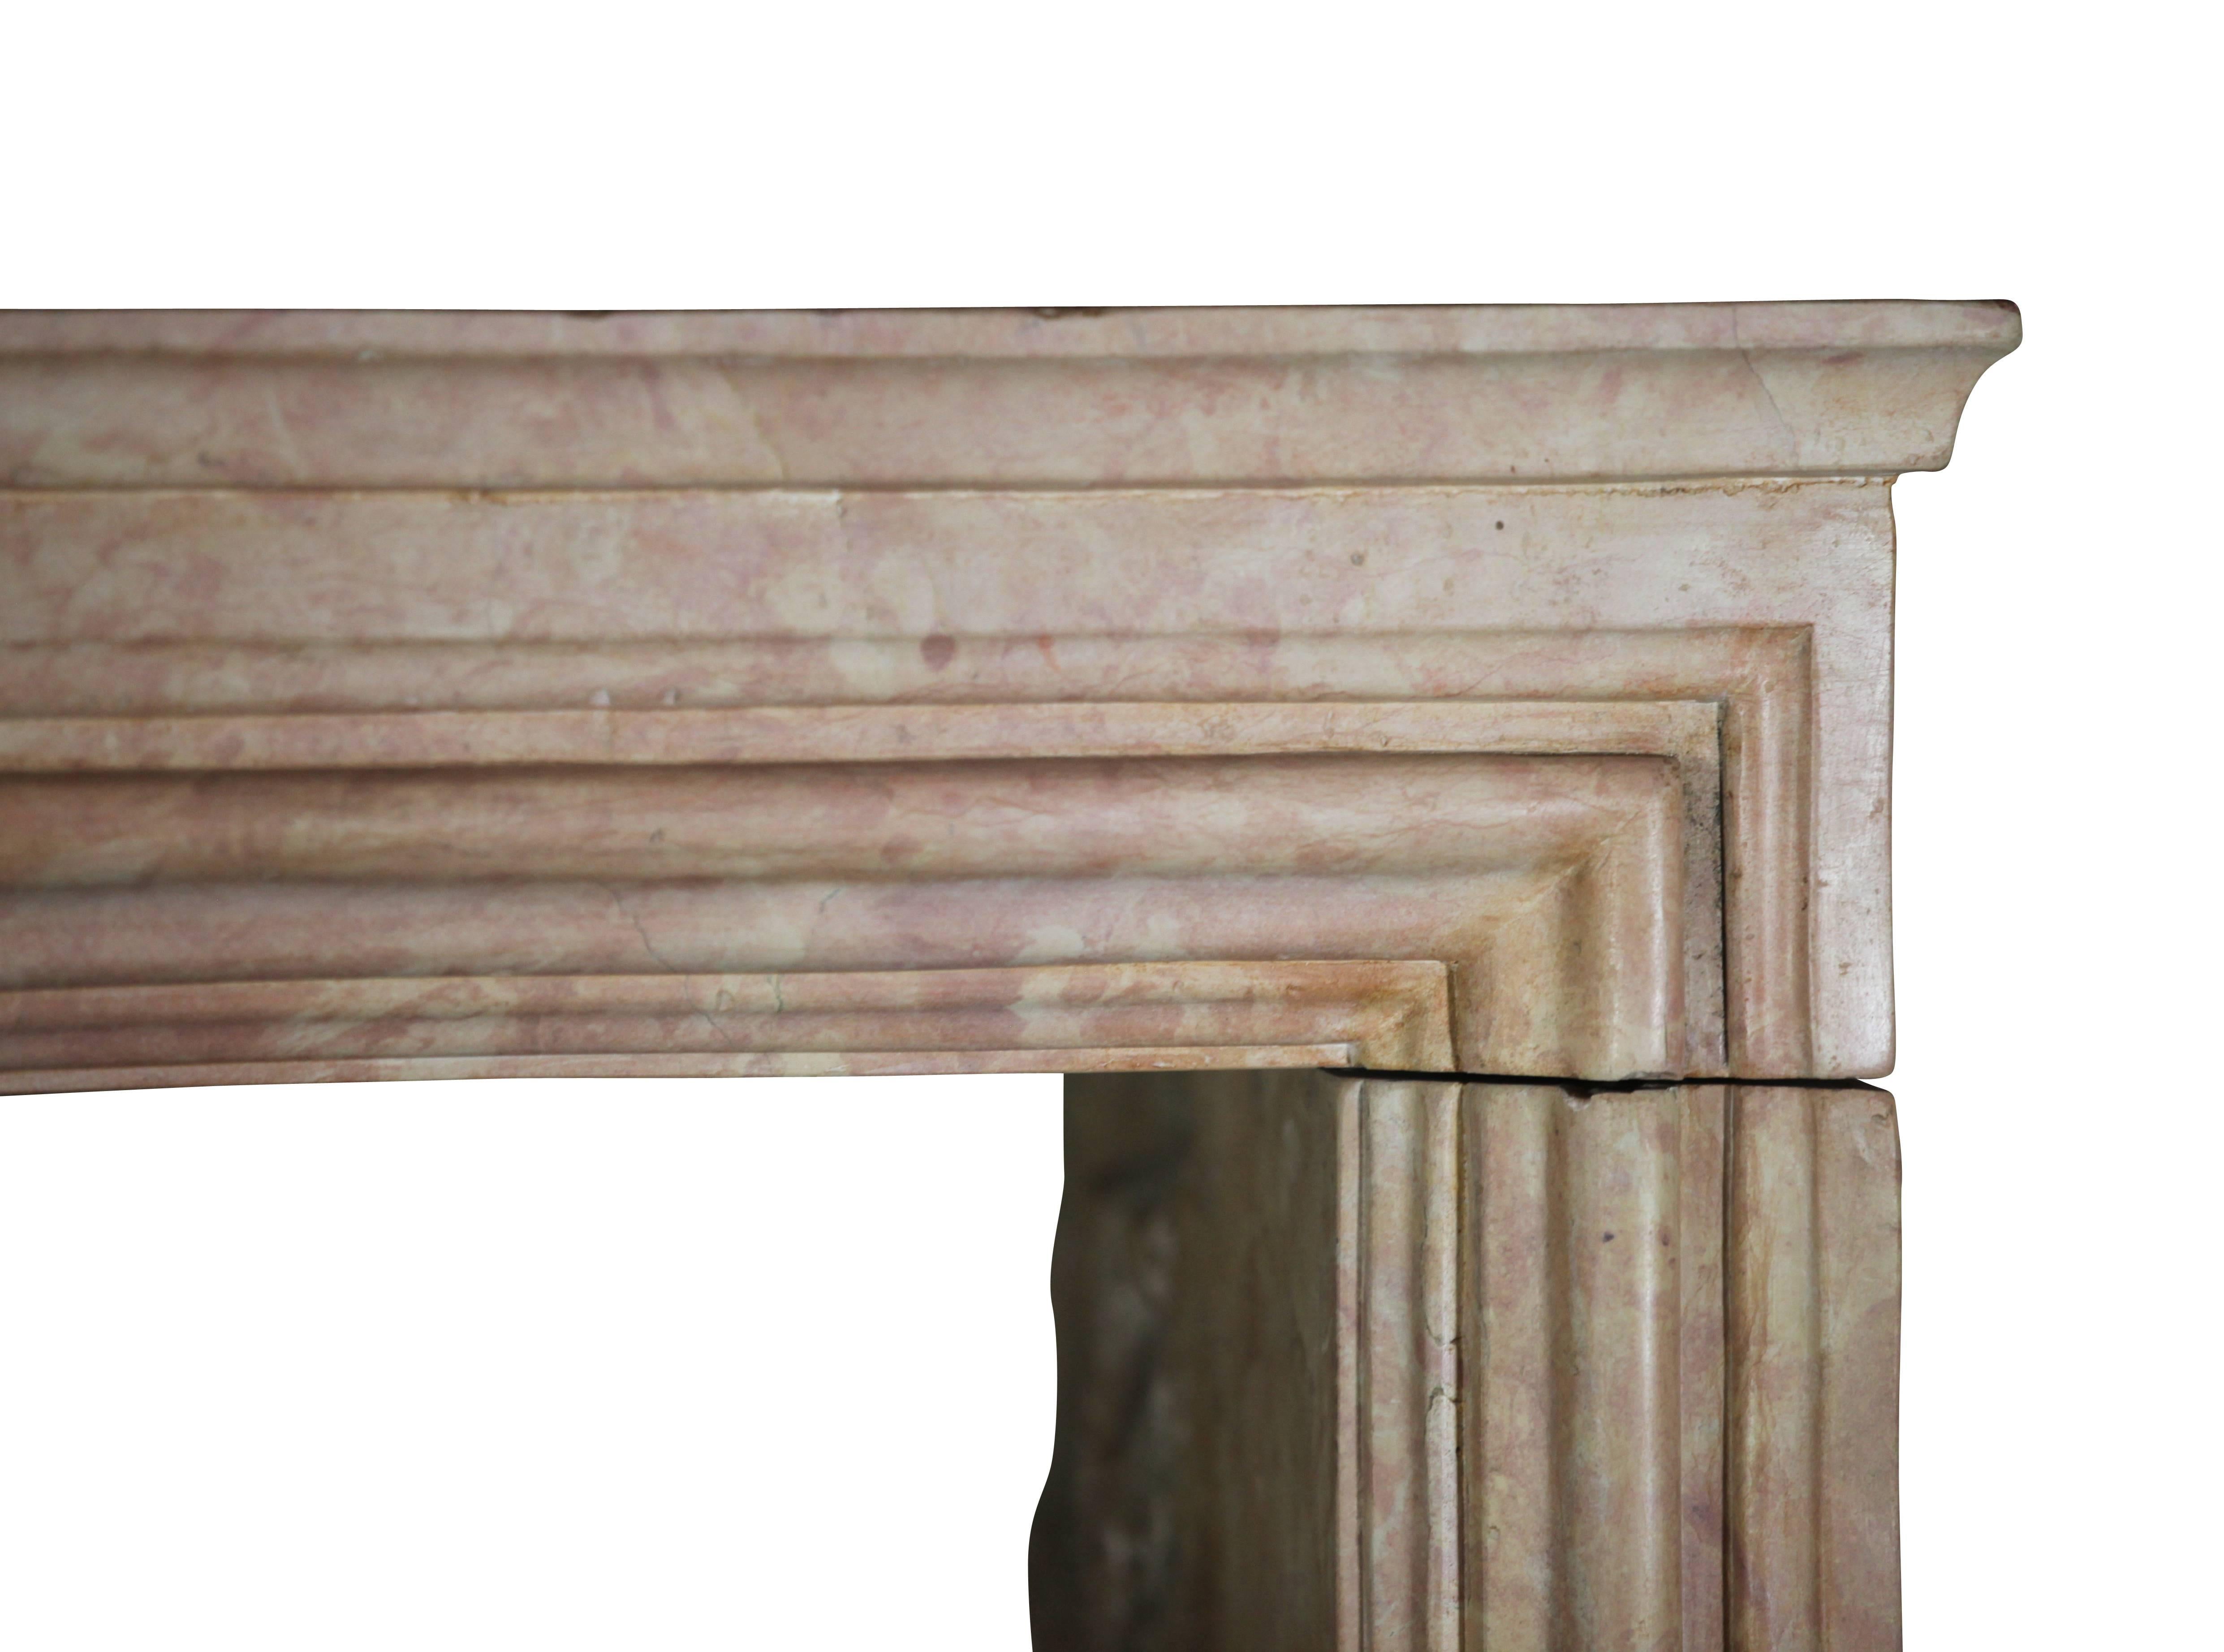 Carved Antique French Fireplace Surround in Rose Liseron Marble for Timely Interior